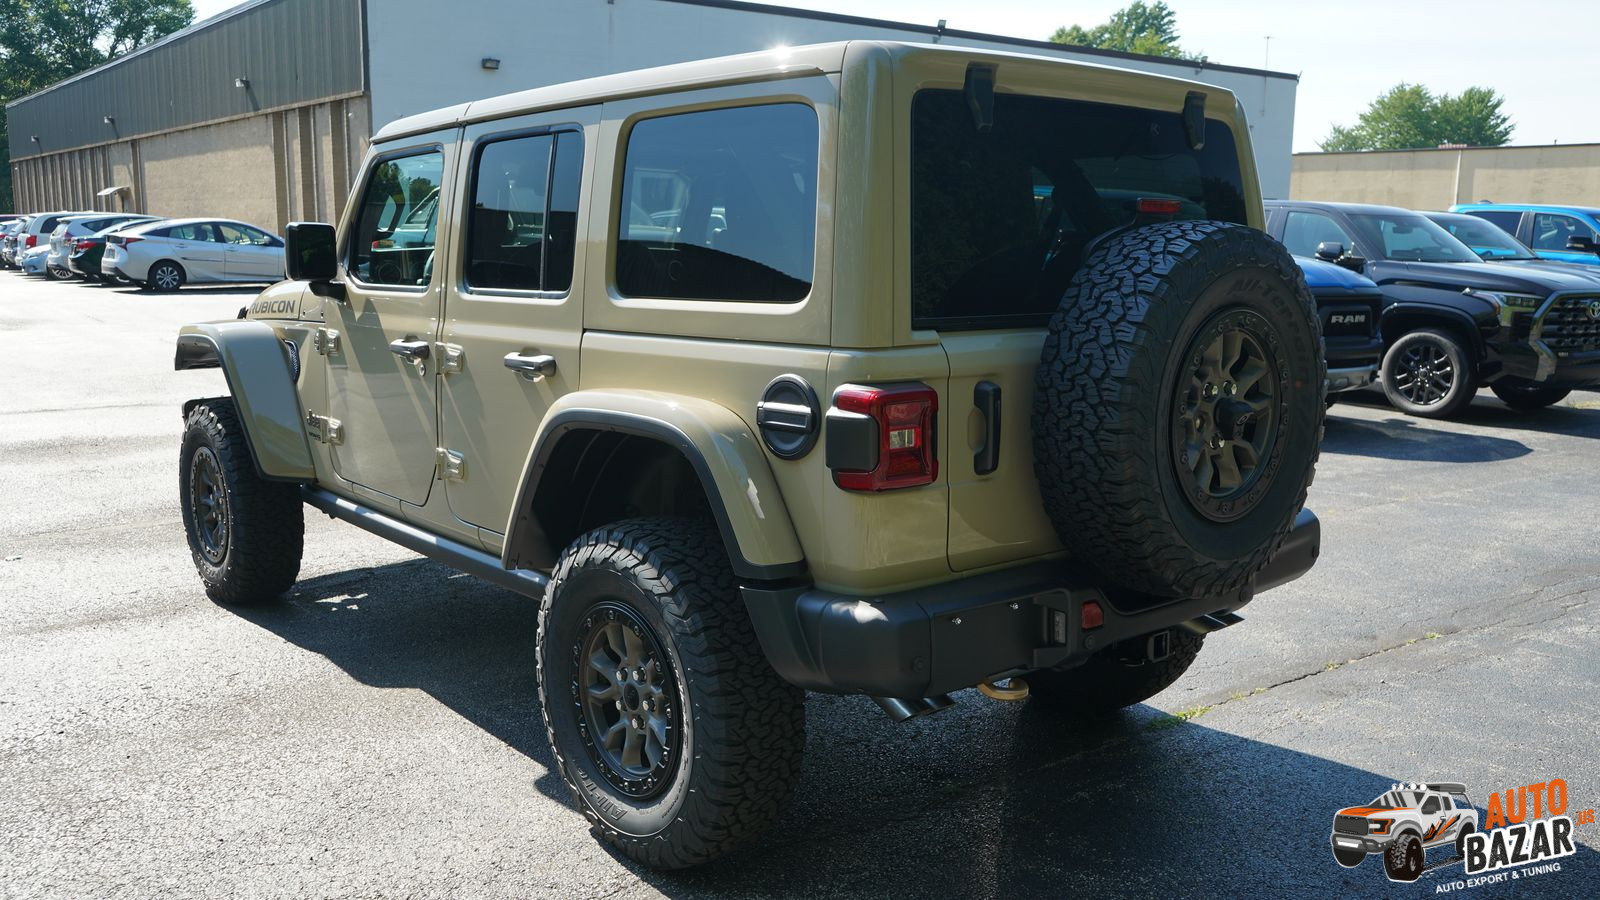 2022 Jeep Wrangler Unlimited Rubicon 392, Buy 83195$, 2022 Jeep Wrangler  Unlimited Rubicon 392